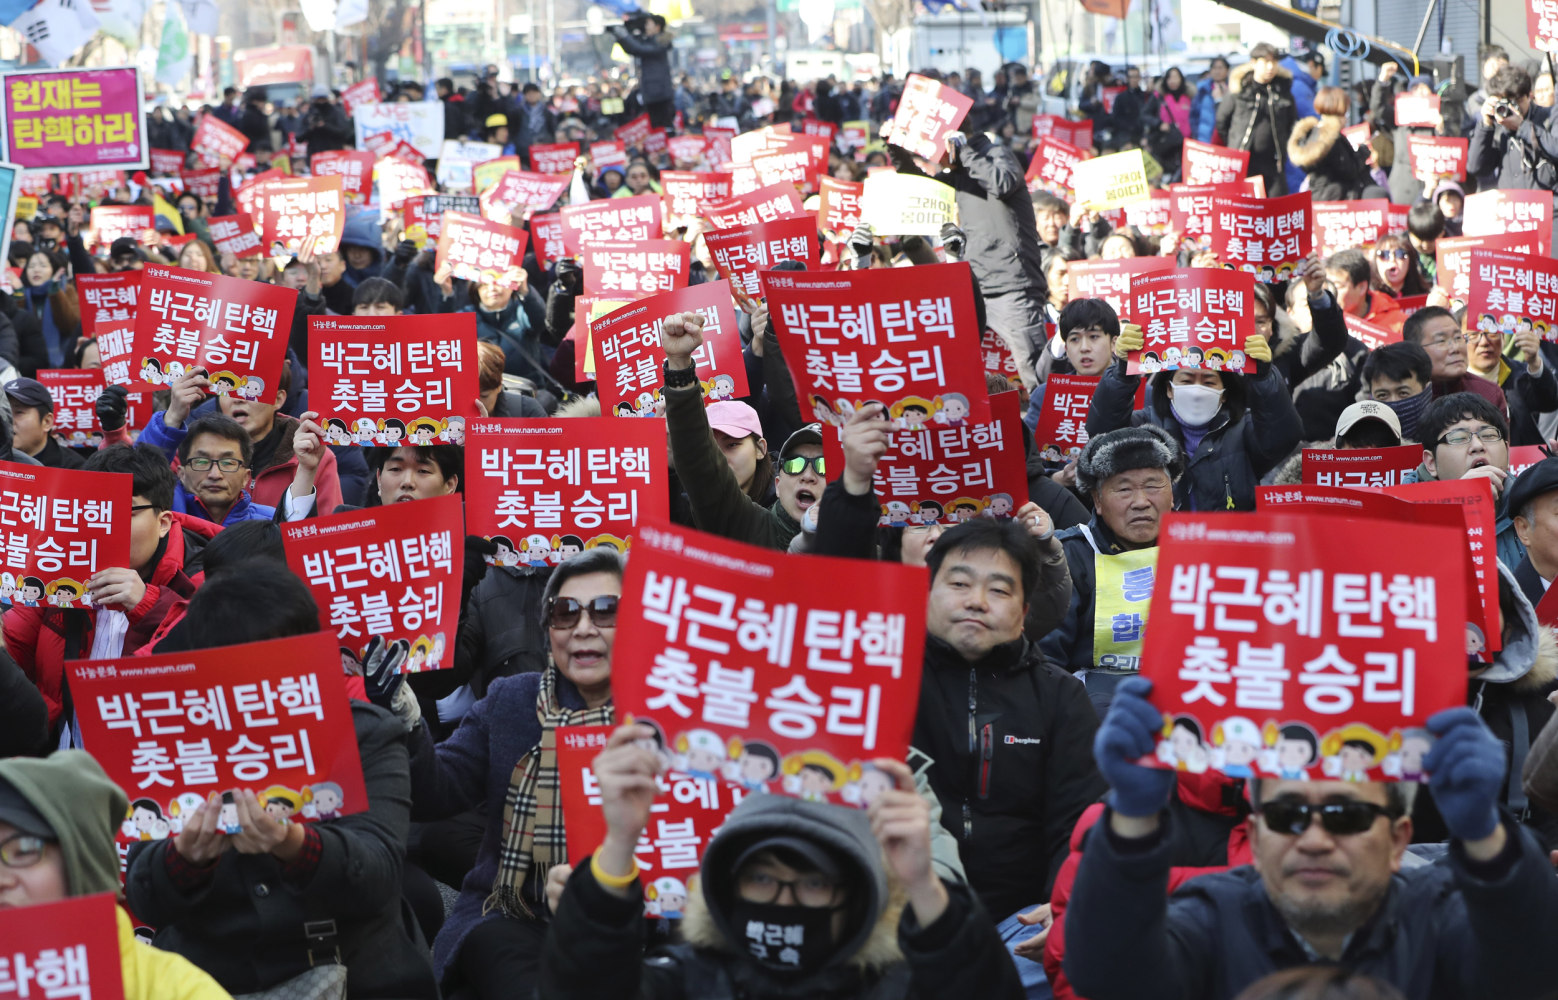 Violence Erupts In The Streets After South Korean President's Fall